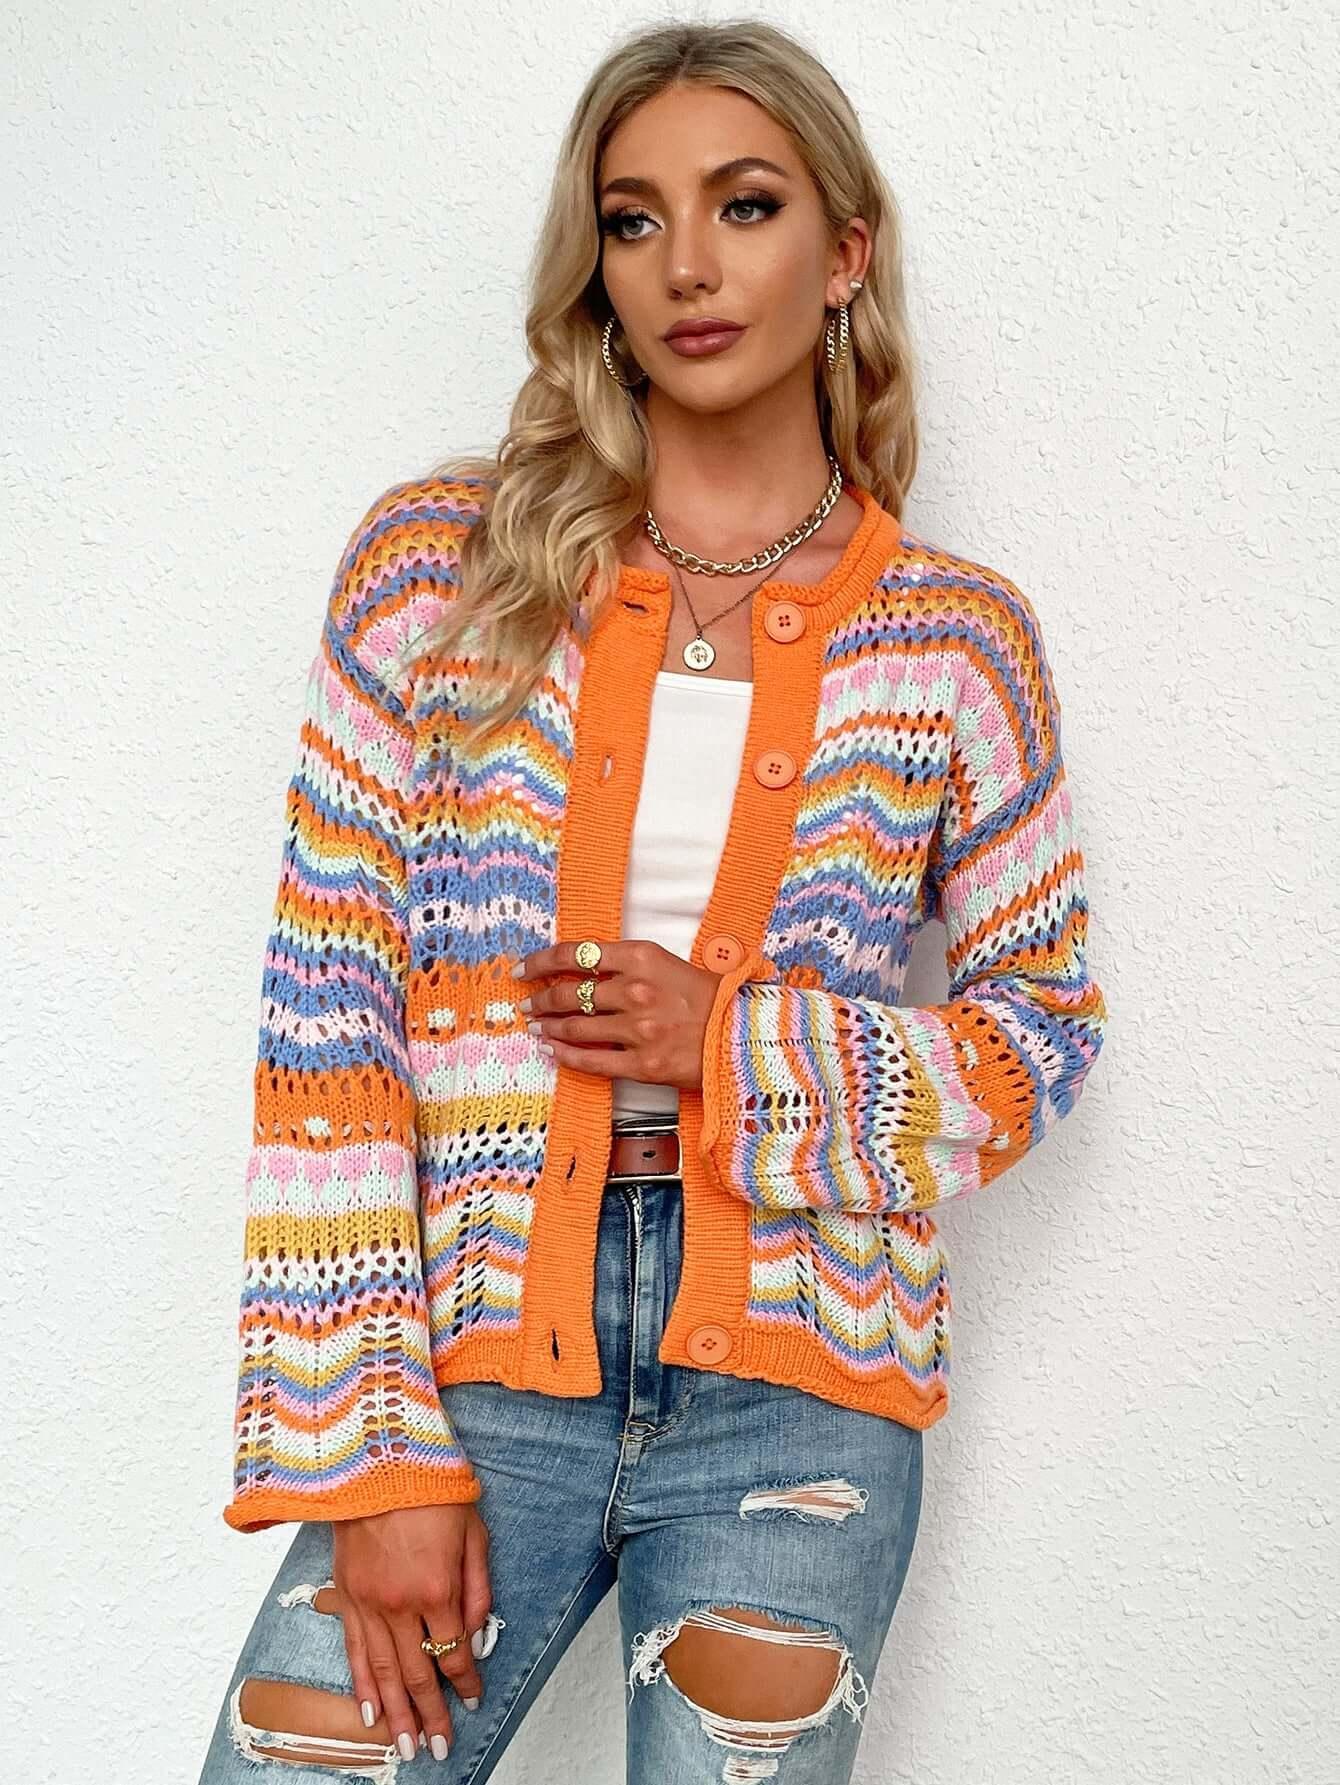 Chevron Cardigan - orange striped cardigan hip length with pockets and button Front. #Firefly Lane Boutique1